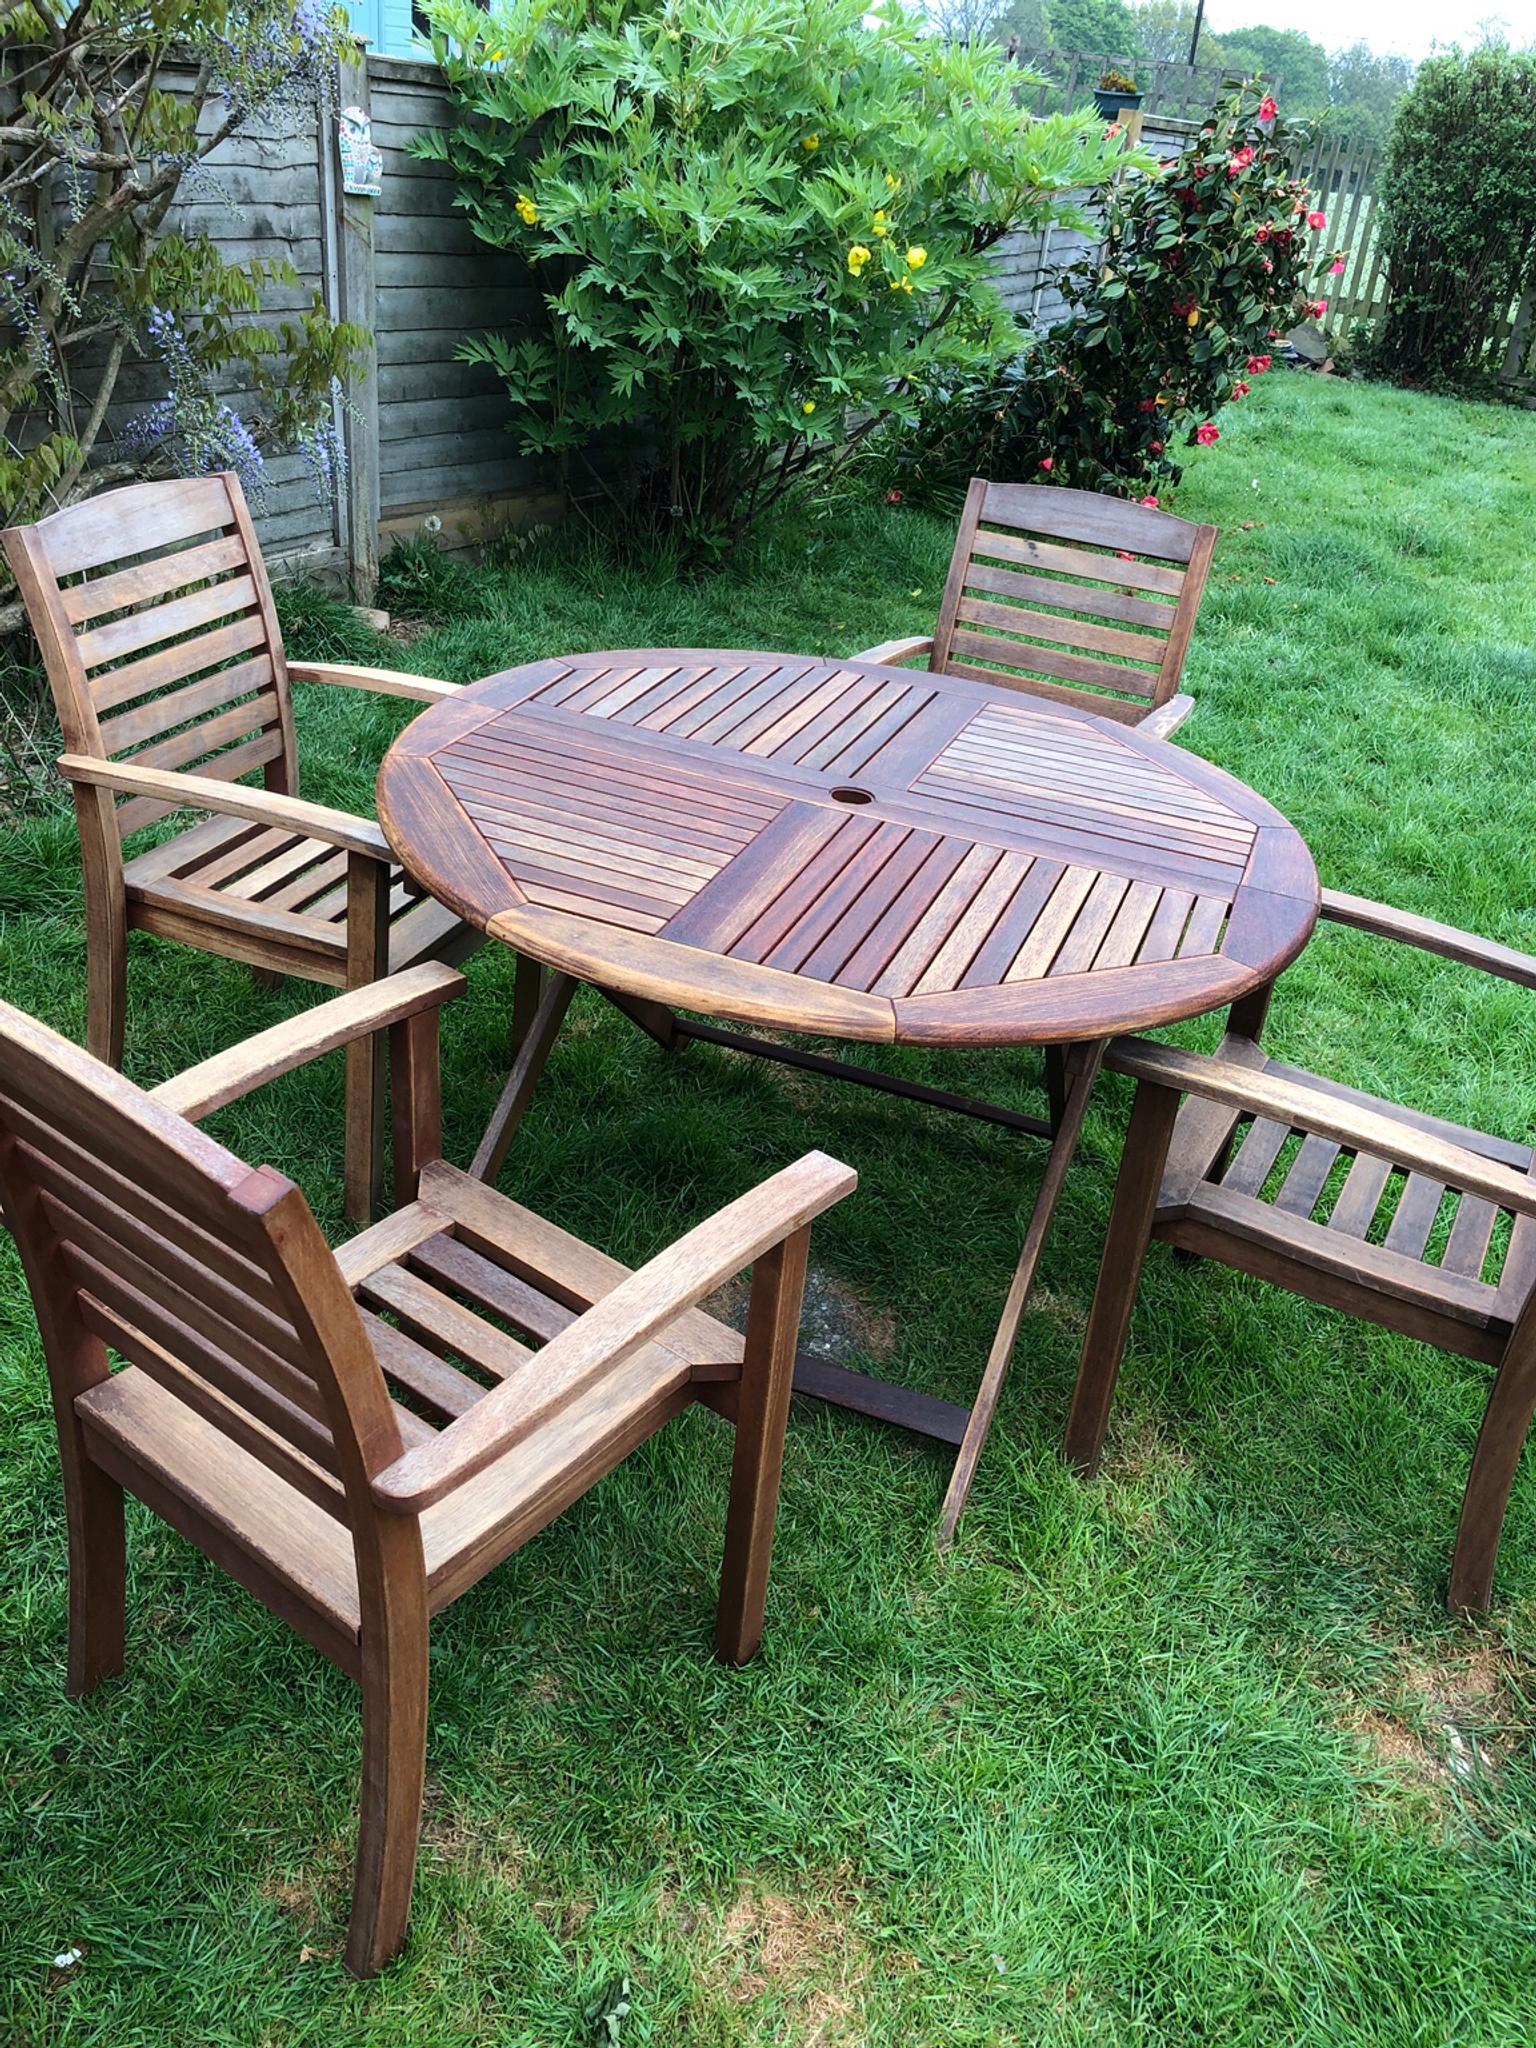 Round Wooden Patio Table 4 Chairs Vgc In Tn18 Wells Fur 150 00